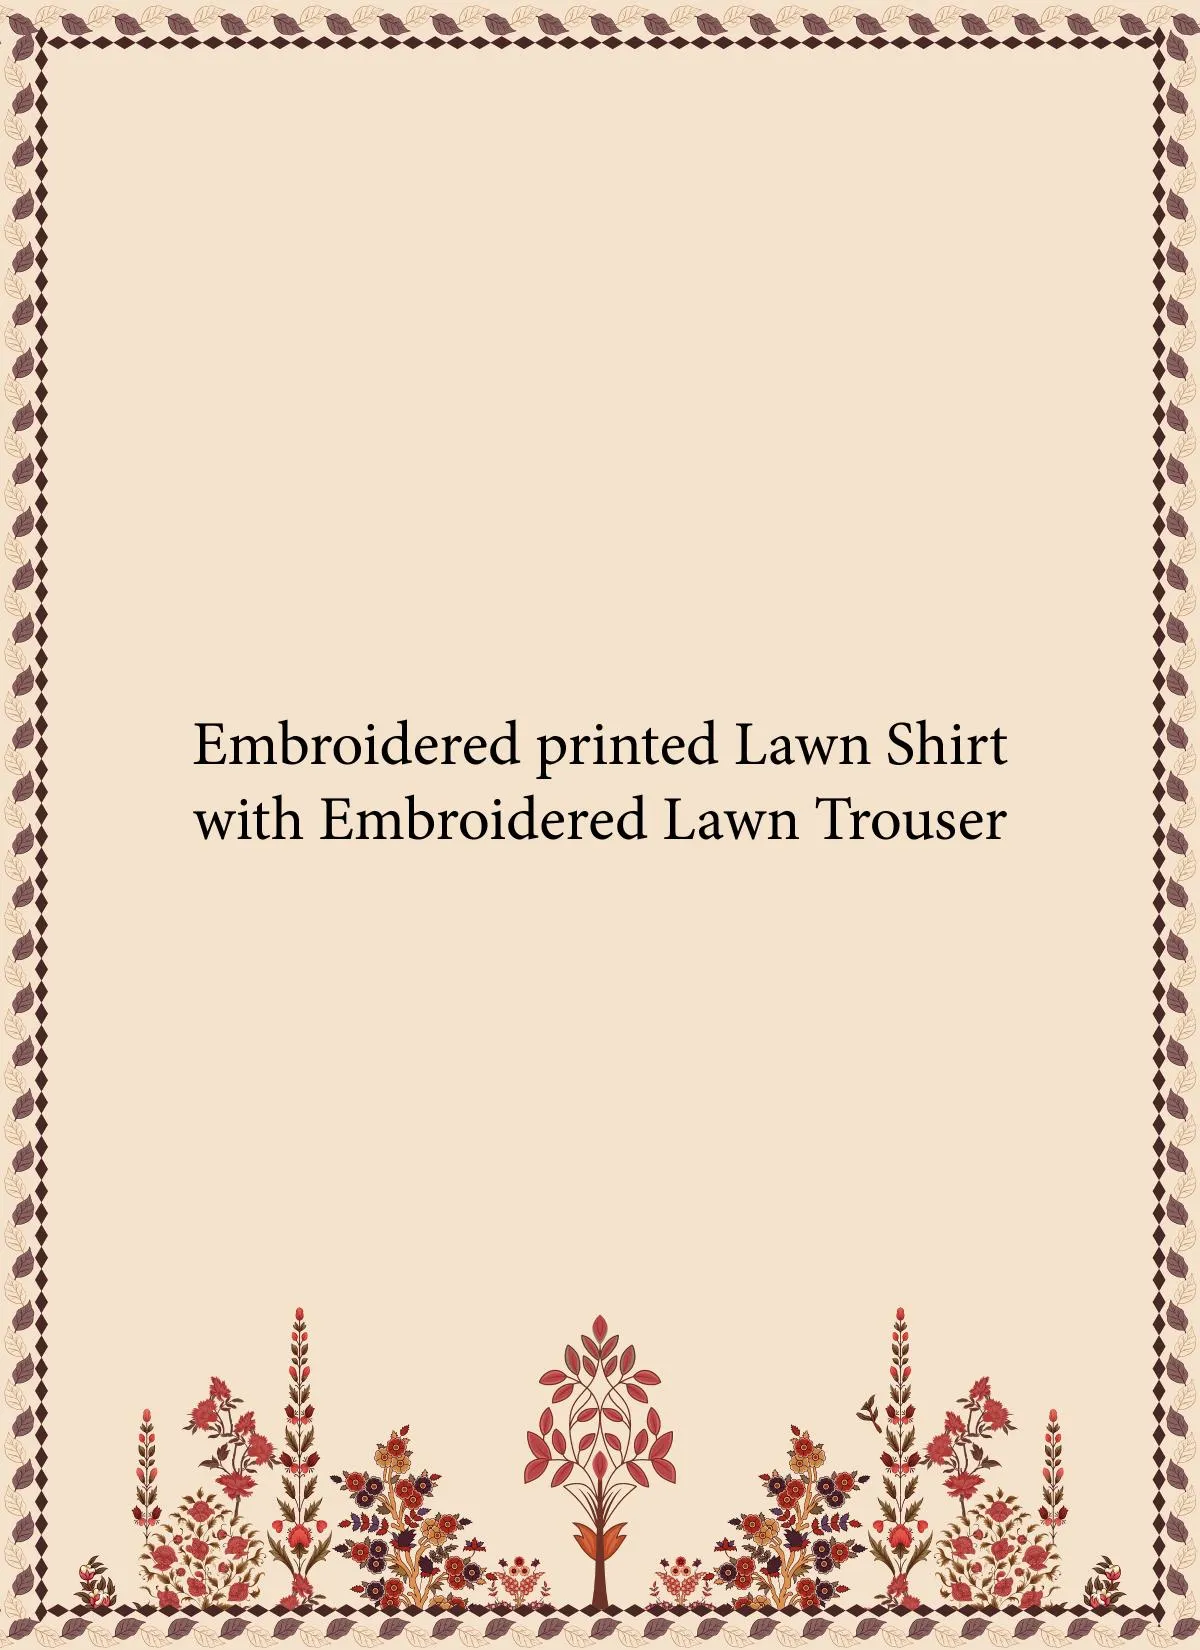 Embroidered printed lawn shirt with Embroidered lawn trouser